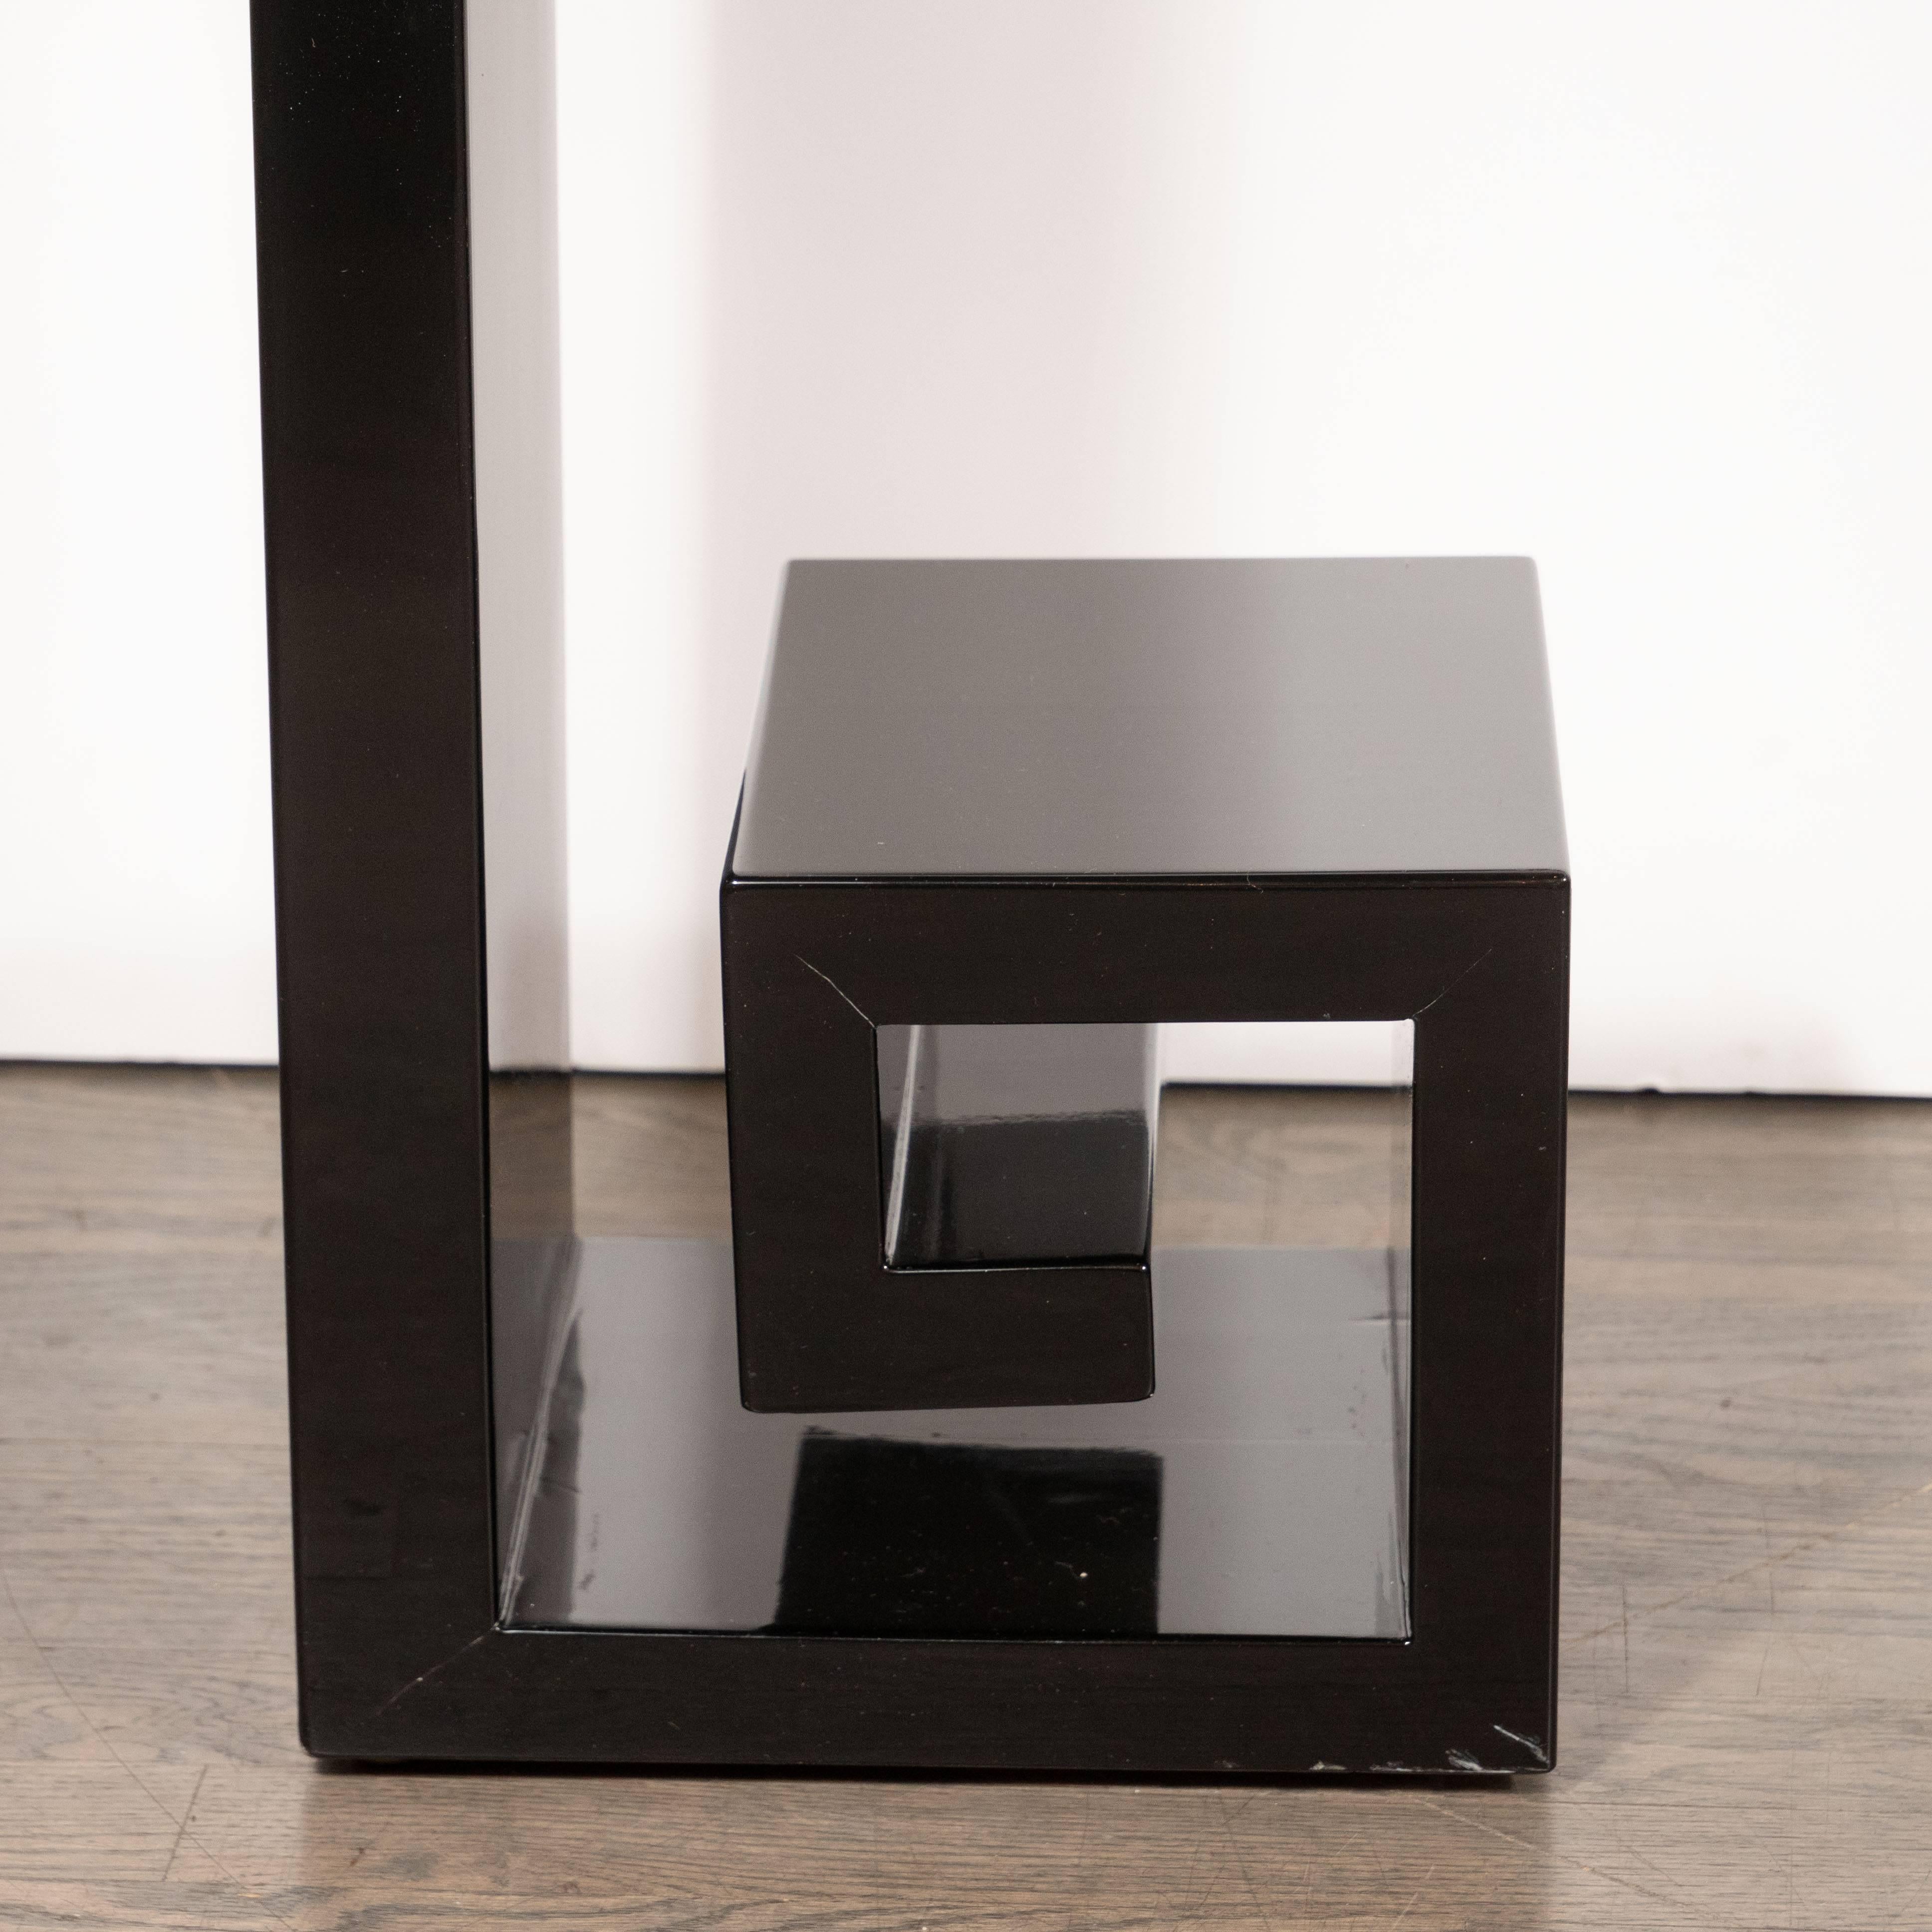 This stunning modernist black lacquer console was realized by artisans in New York state. It offers an open square form with stylized Greek key detailing at its base and a rectangular drawer in its centre. With its classically inspired form and